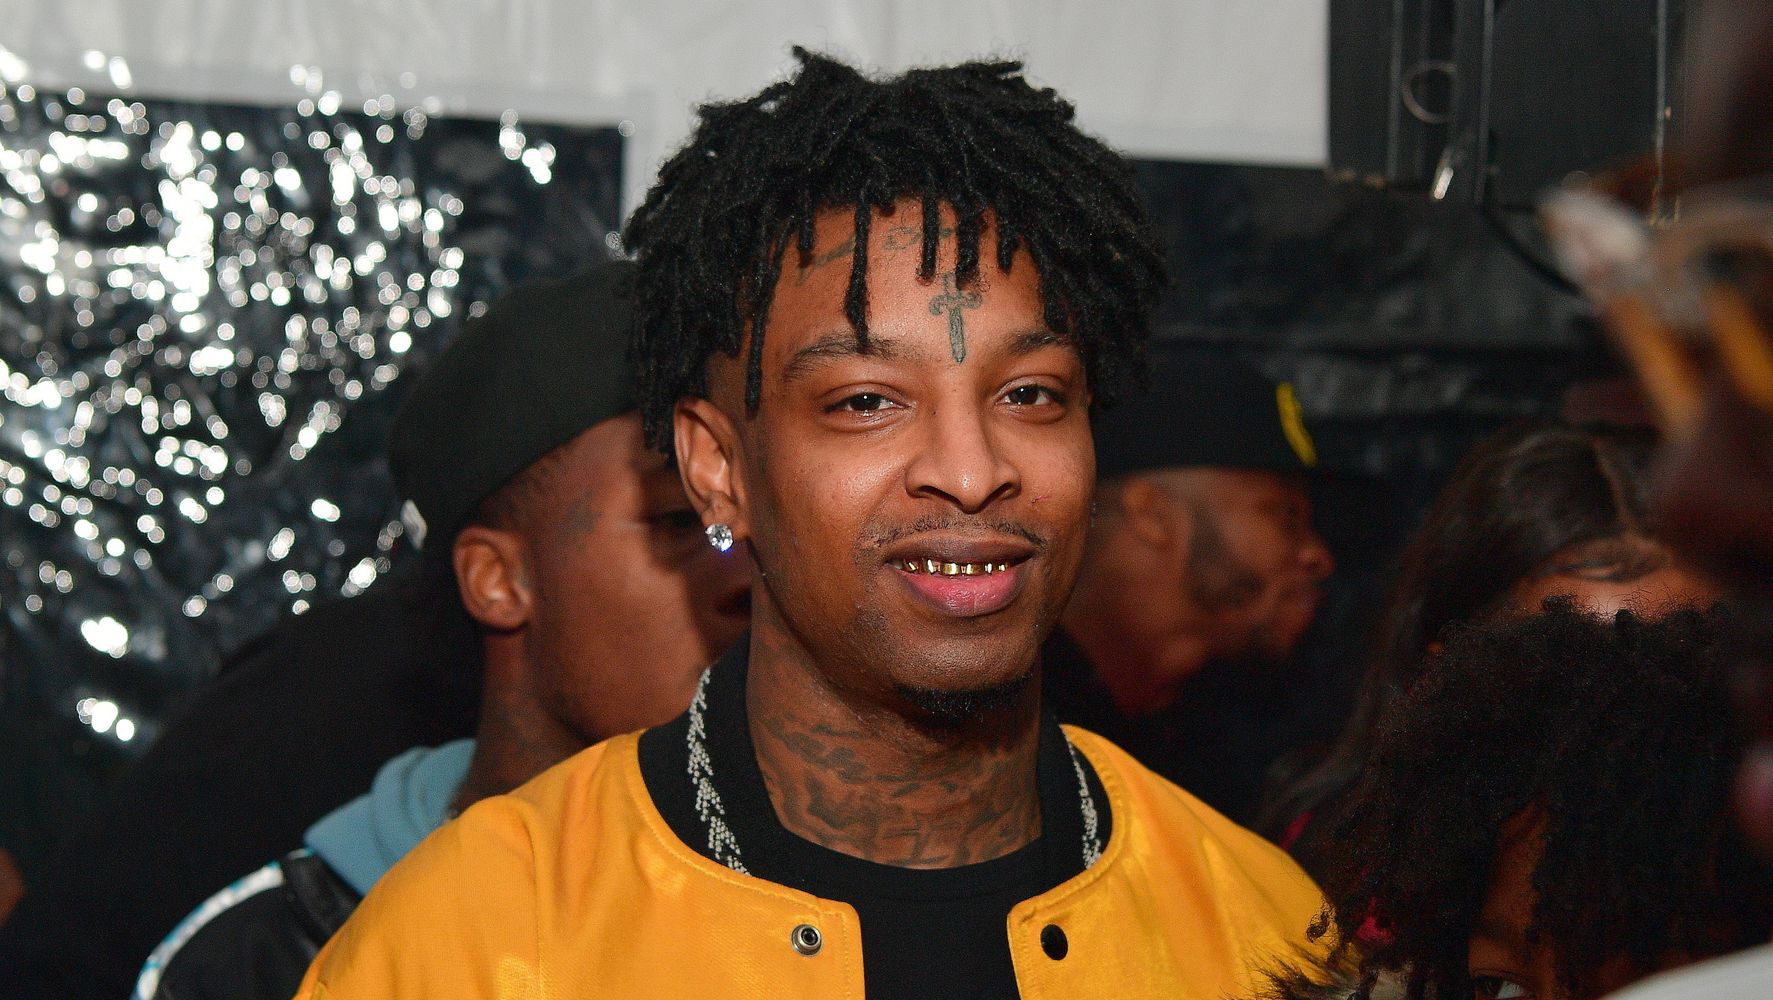 HYPEBEAST - 21 Savage sat down with the The New York Times to discuss his  experiences growing up as an undocumented immigrant. Read what #21Savage  had to say on his deportation case